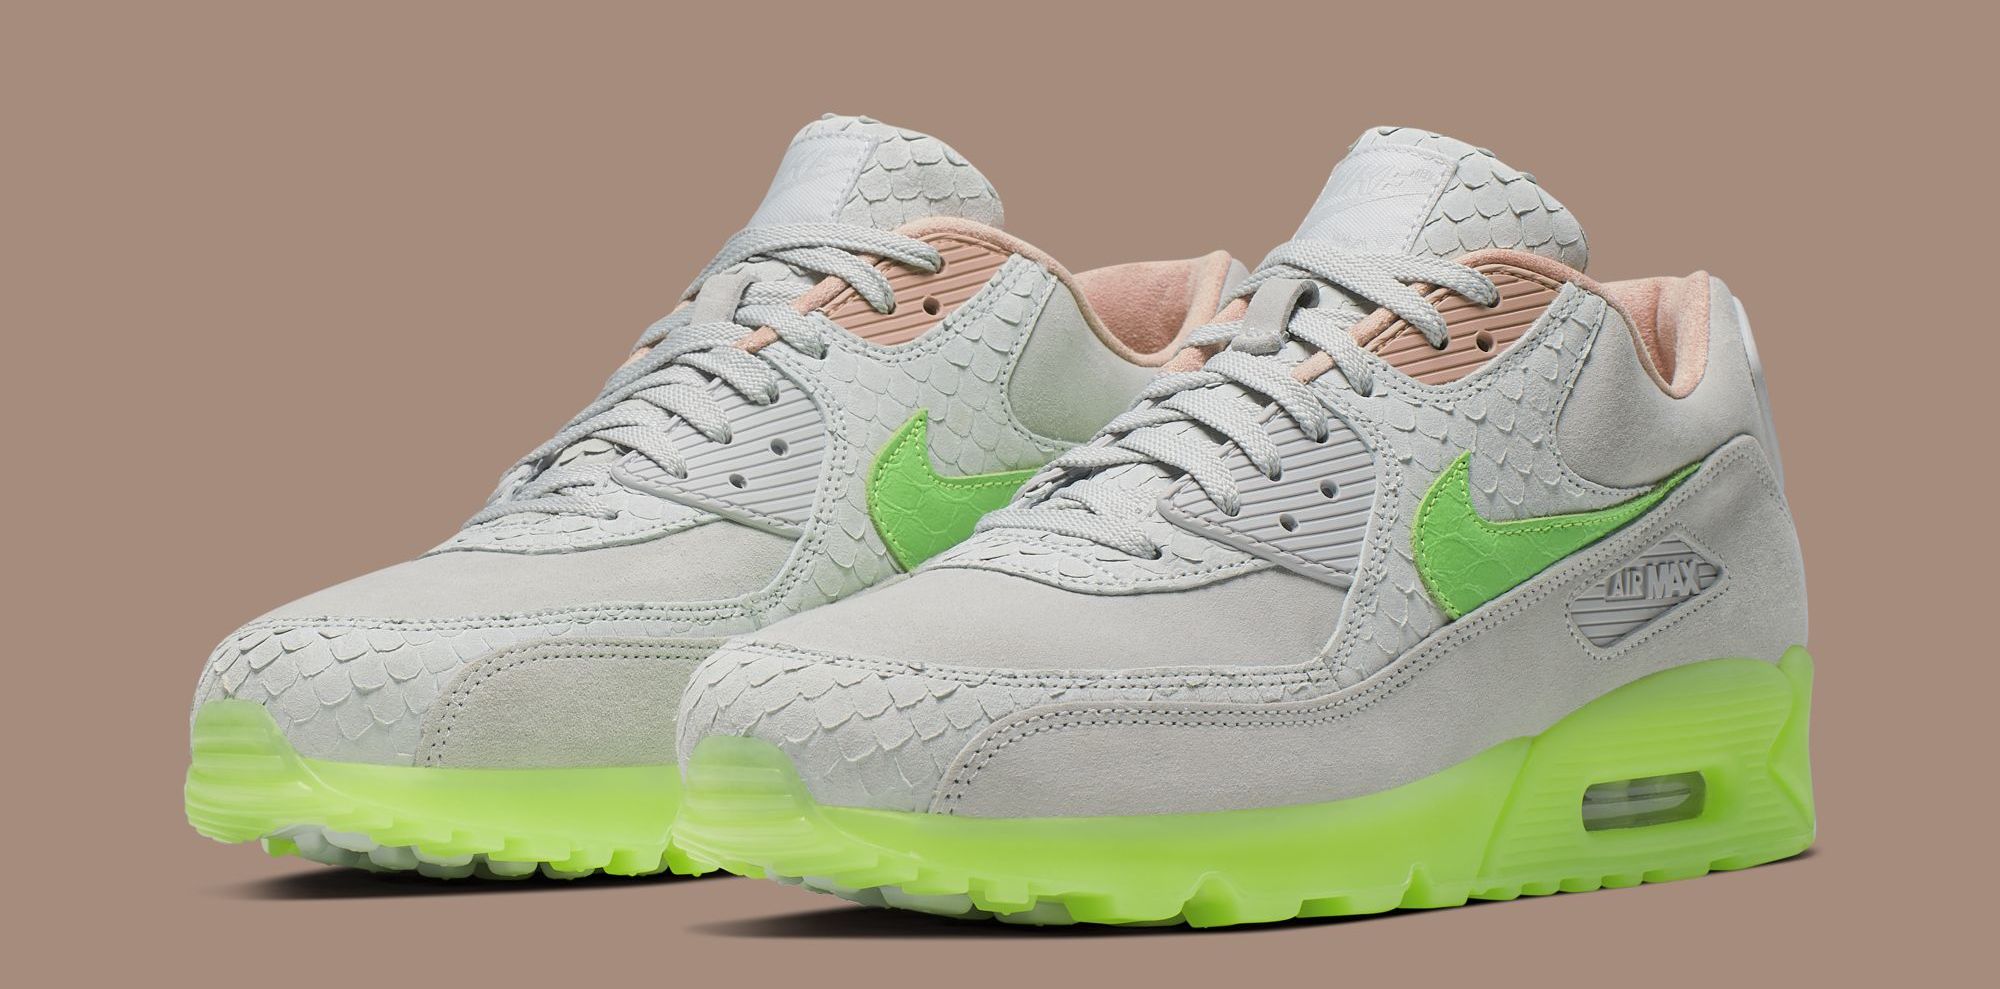 The 'New Species' Air Max 90 Drops This Weekend | Complex